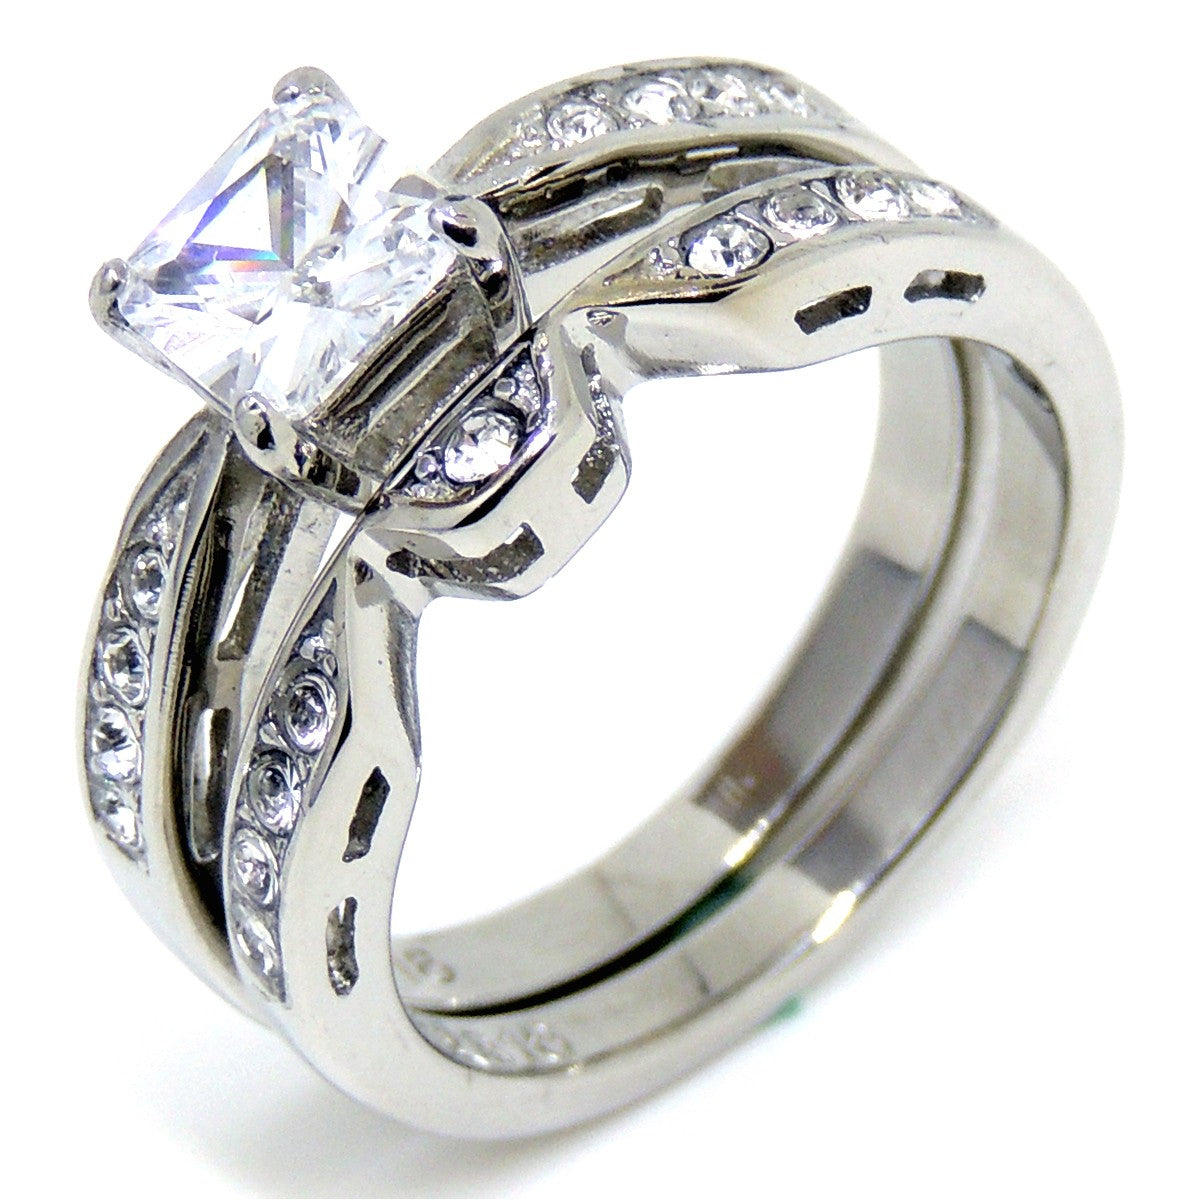 Princess cut Clear CZ Stainless Steel Hypoallergenic Ring Set - LA NY Jewelry